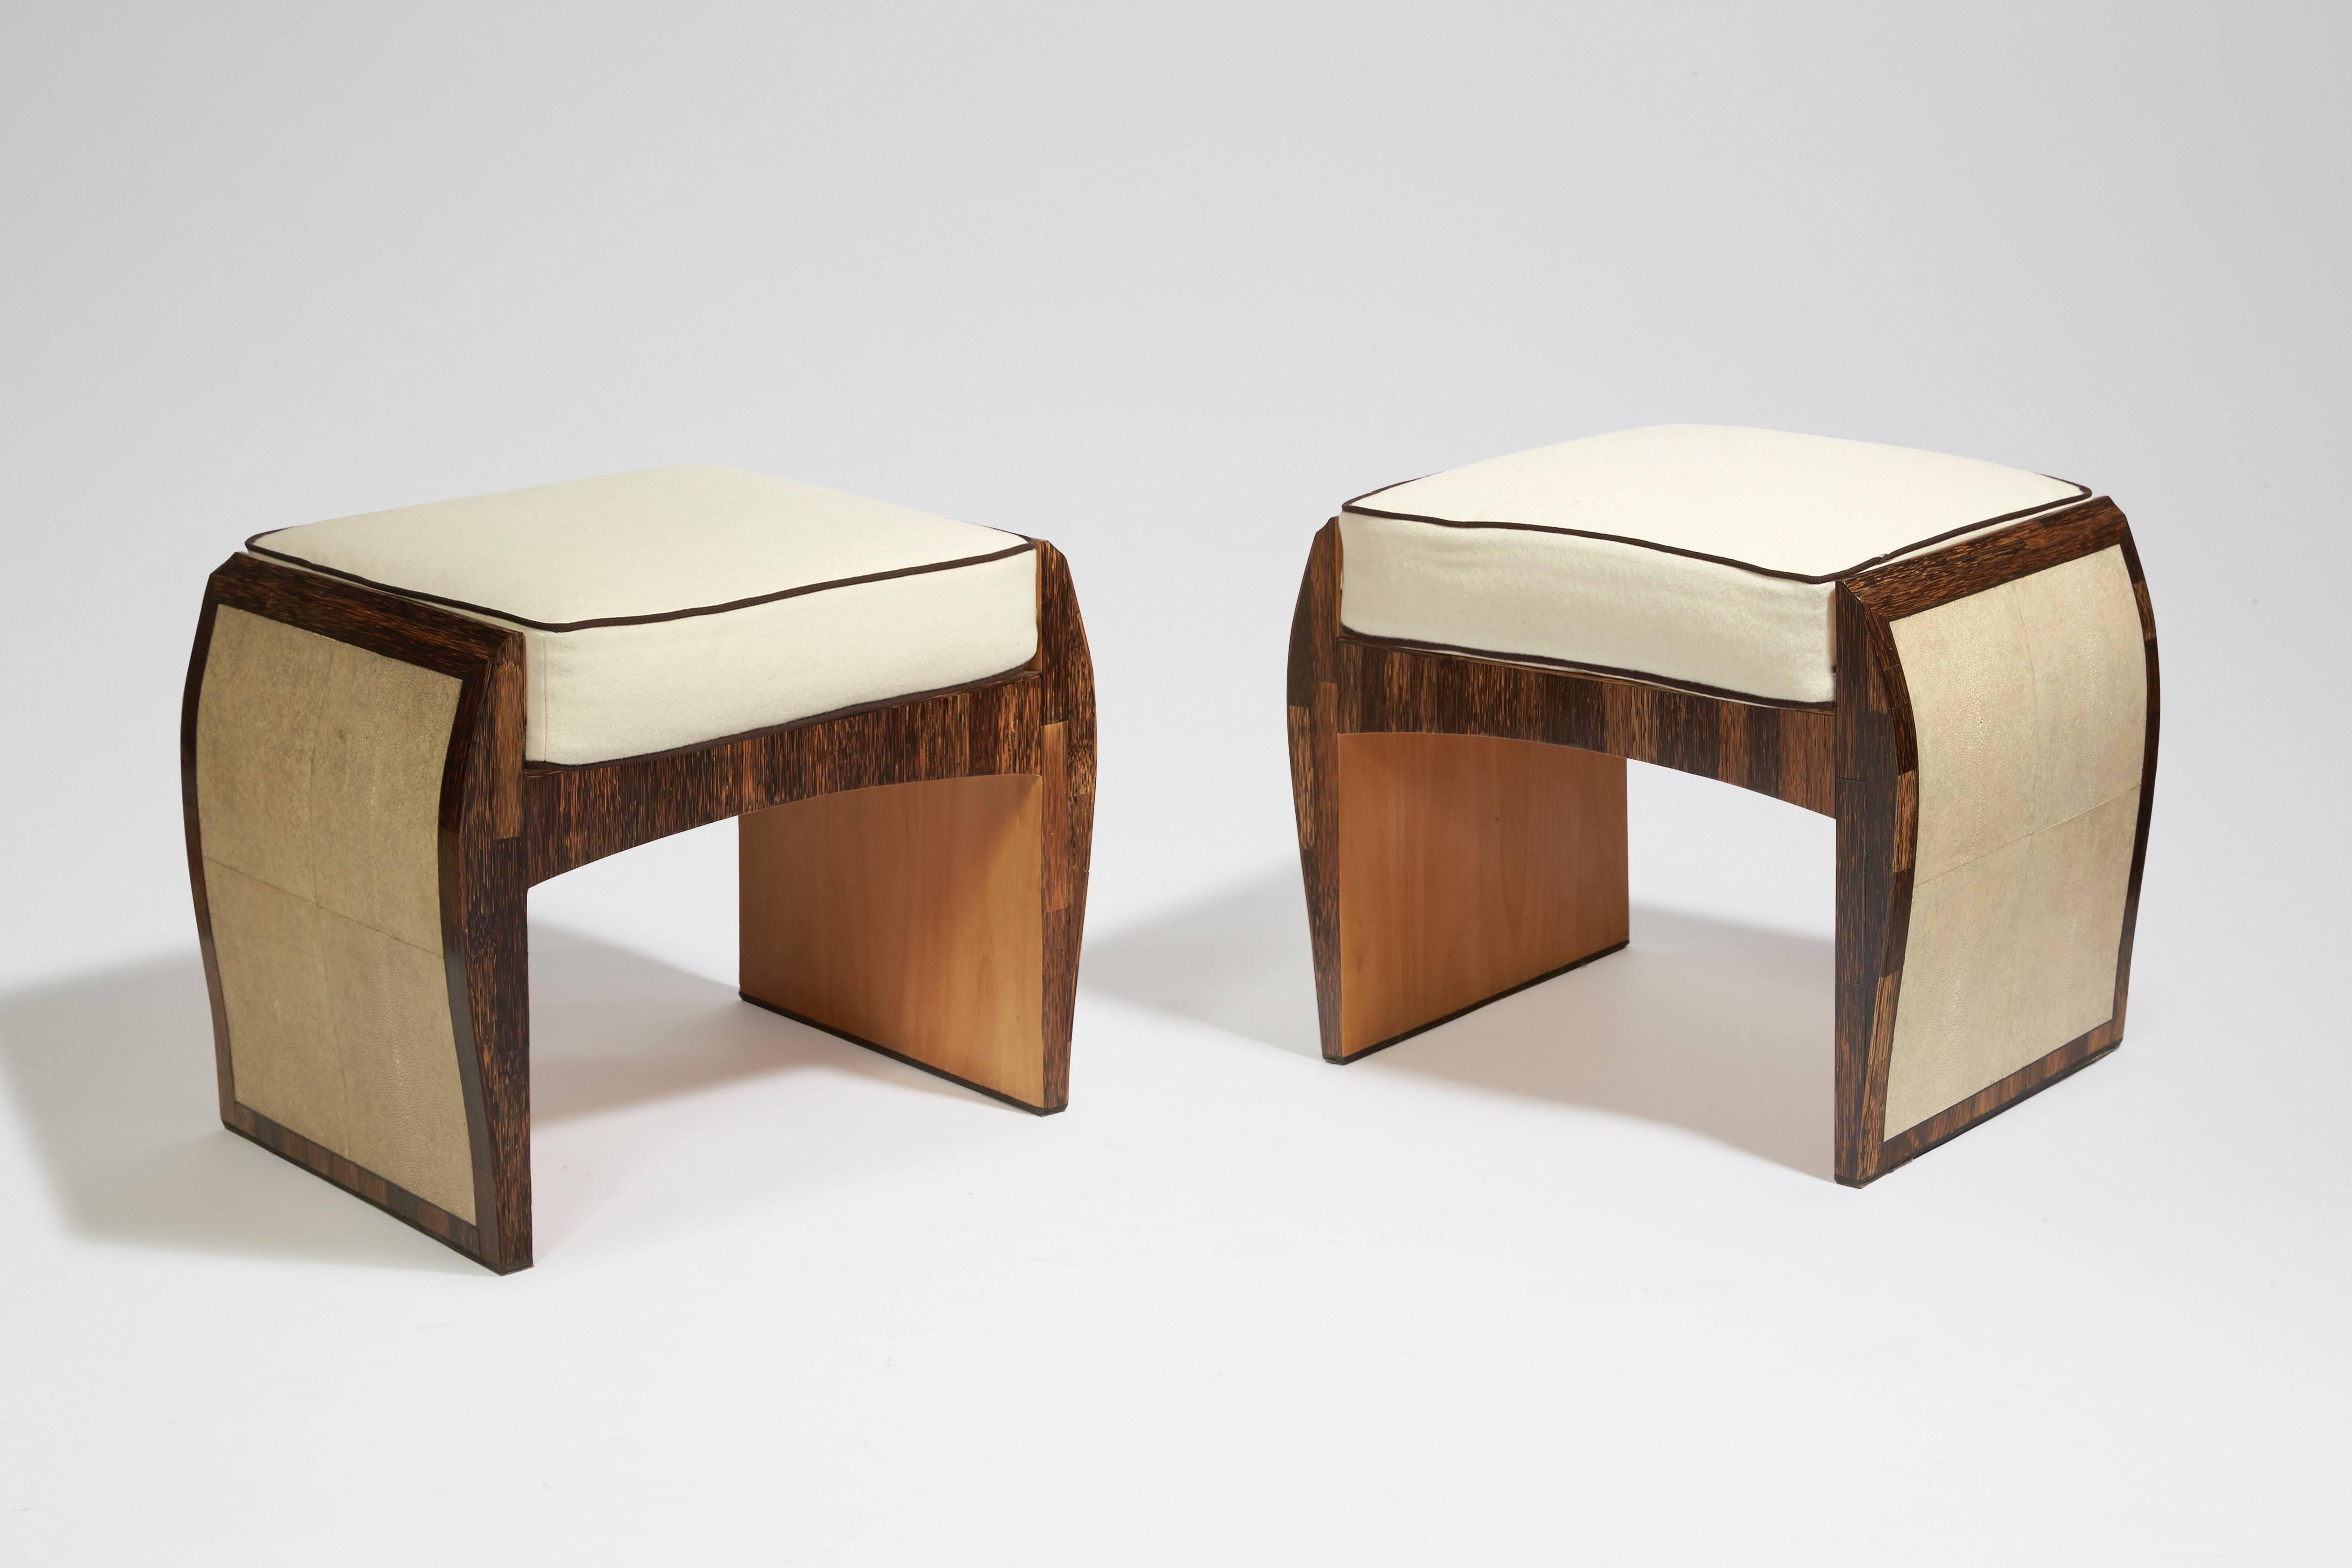 Rectangular seats in palm veneer and shagreen, with lateral full rounded base. Removable seats and cushions covered with beige fabric. Signed on a bronze plaque on each piece.